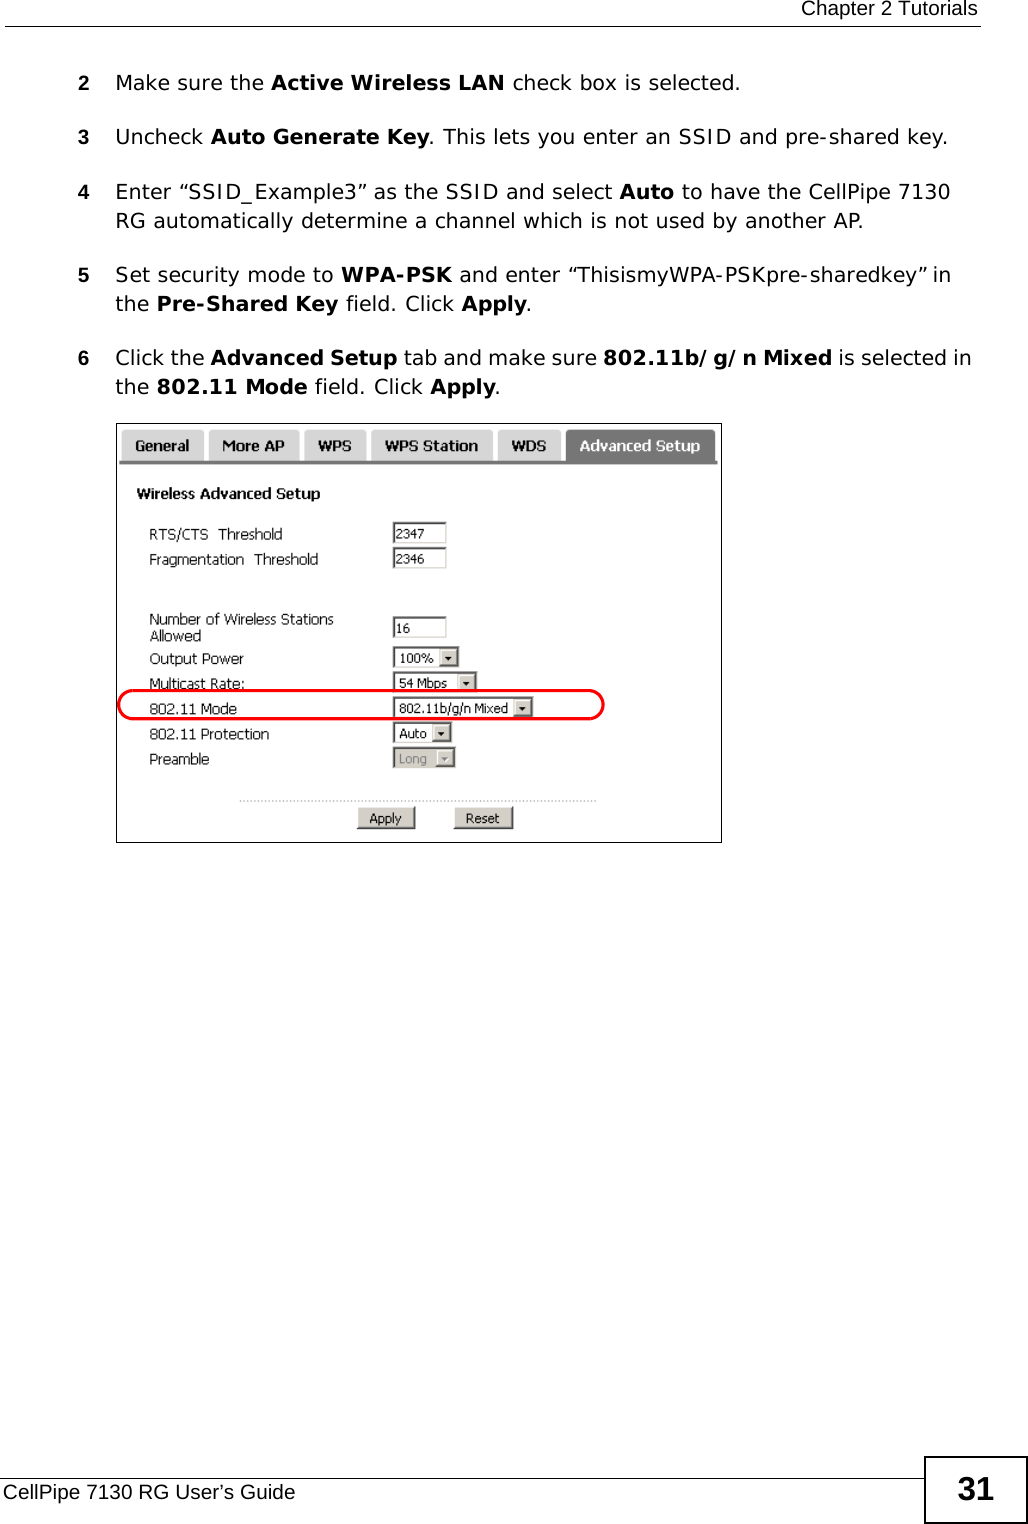  Chapter 2 TutorialsCellPipe 7130 RG User’s Guide 312Make sure the Active Wireless LAN check box is selected.3Uncheck Auto Generate Key. This lets you enter an SSID and pre-shared key.4Enter “SSID_Example3” as the SSID and select Auto to have the CellPipe 7130 RG automatically determine a channel which is not used by another AP.5Set security mode to WPA-PSK and enter “ThisismyWPA-PSKpre-sharedkey” in the Pre-Shared Key field. Click Apply.6Click the Advanced Setup tab and make sure 802.11b/g/n Mixed is selected in the 802.11 Mode field. Click Apply.Wireless LA N &gt; Advanced Setup